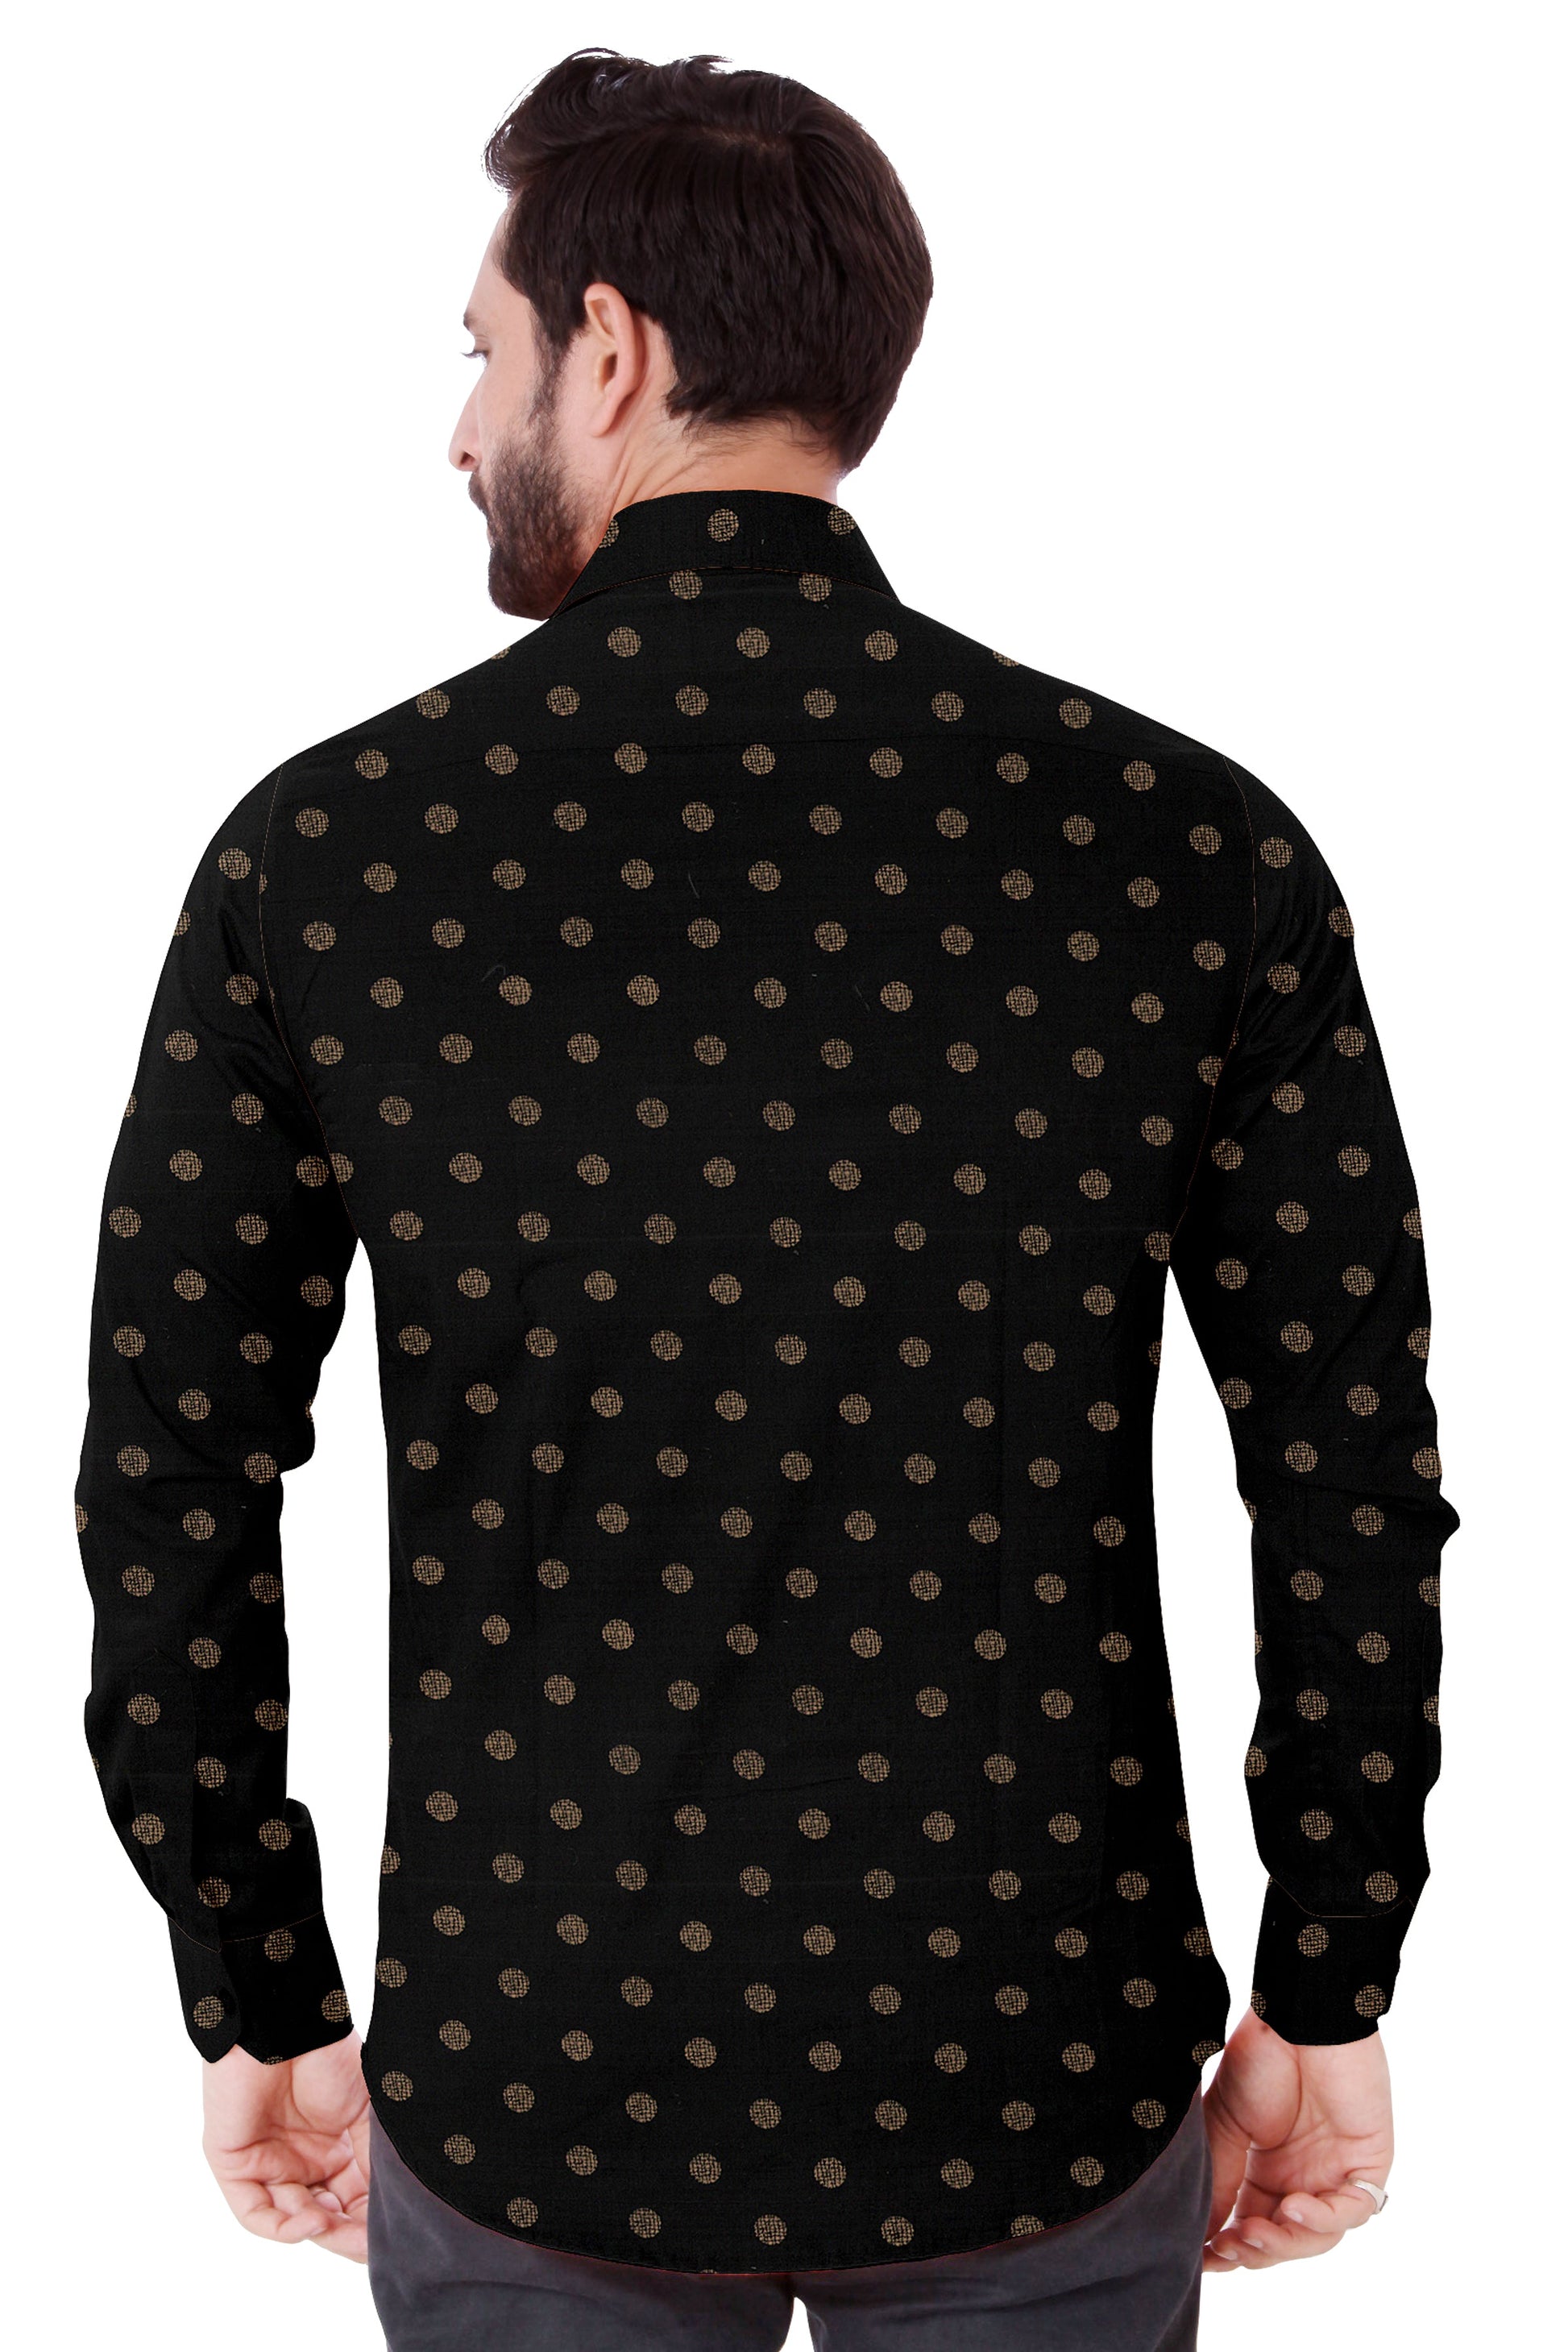 Men's Black Yellow Dotted Casual Full Sleeves 100% Cotton - Styleflea